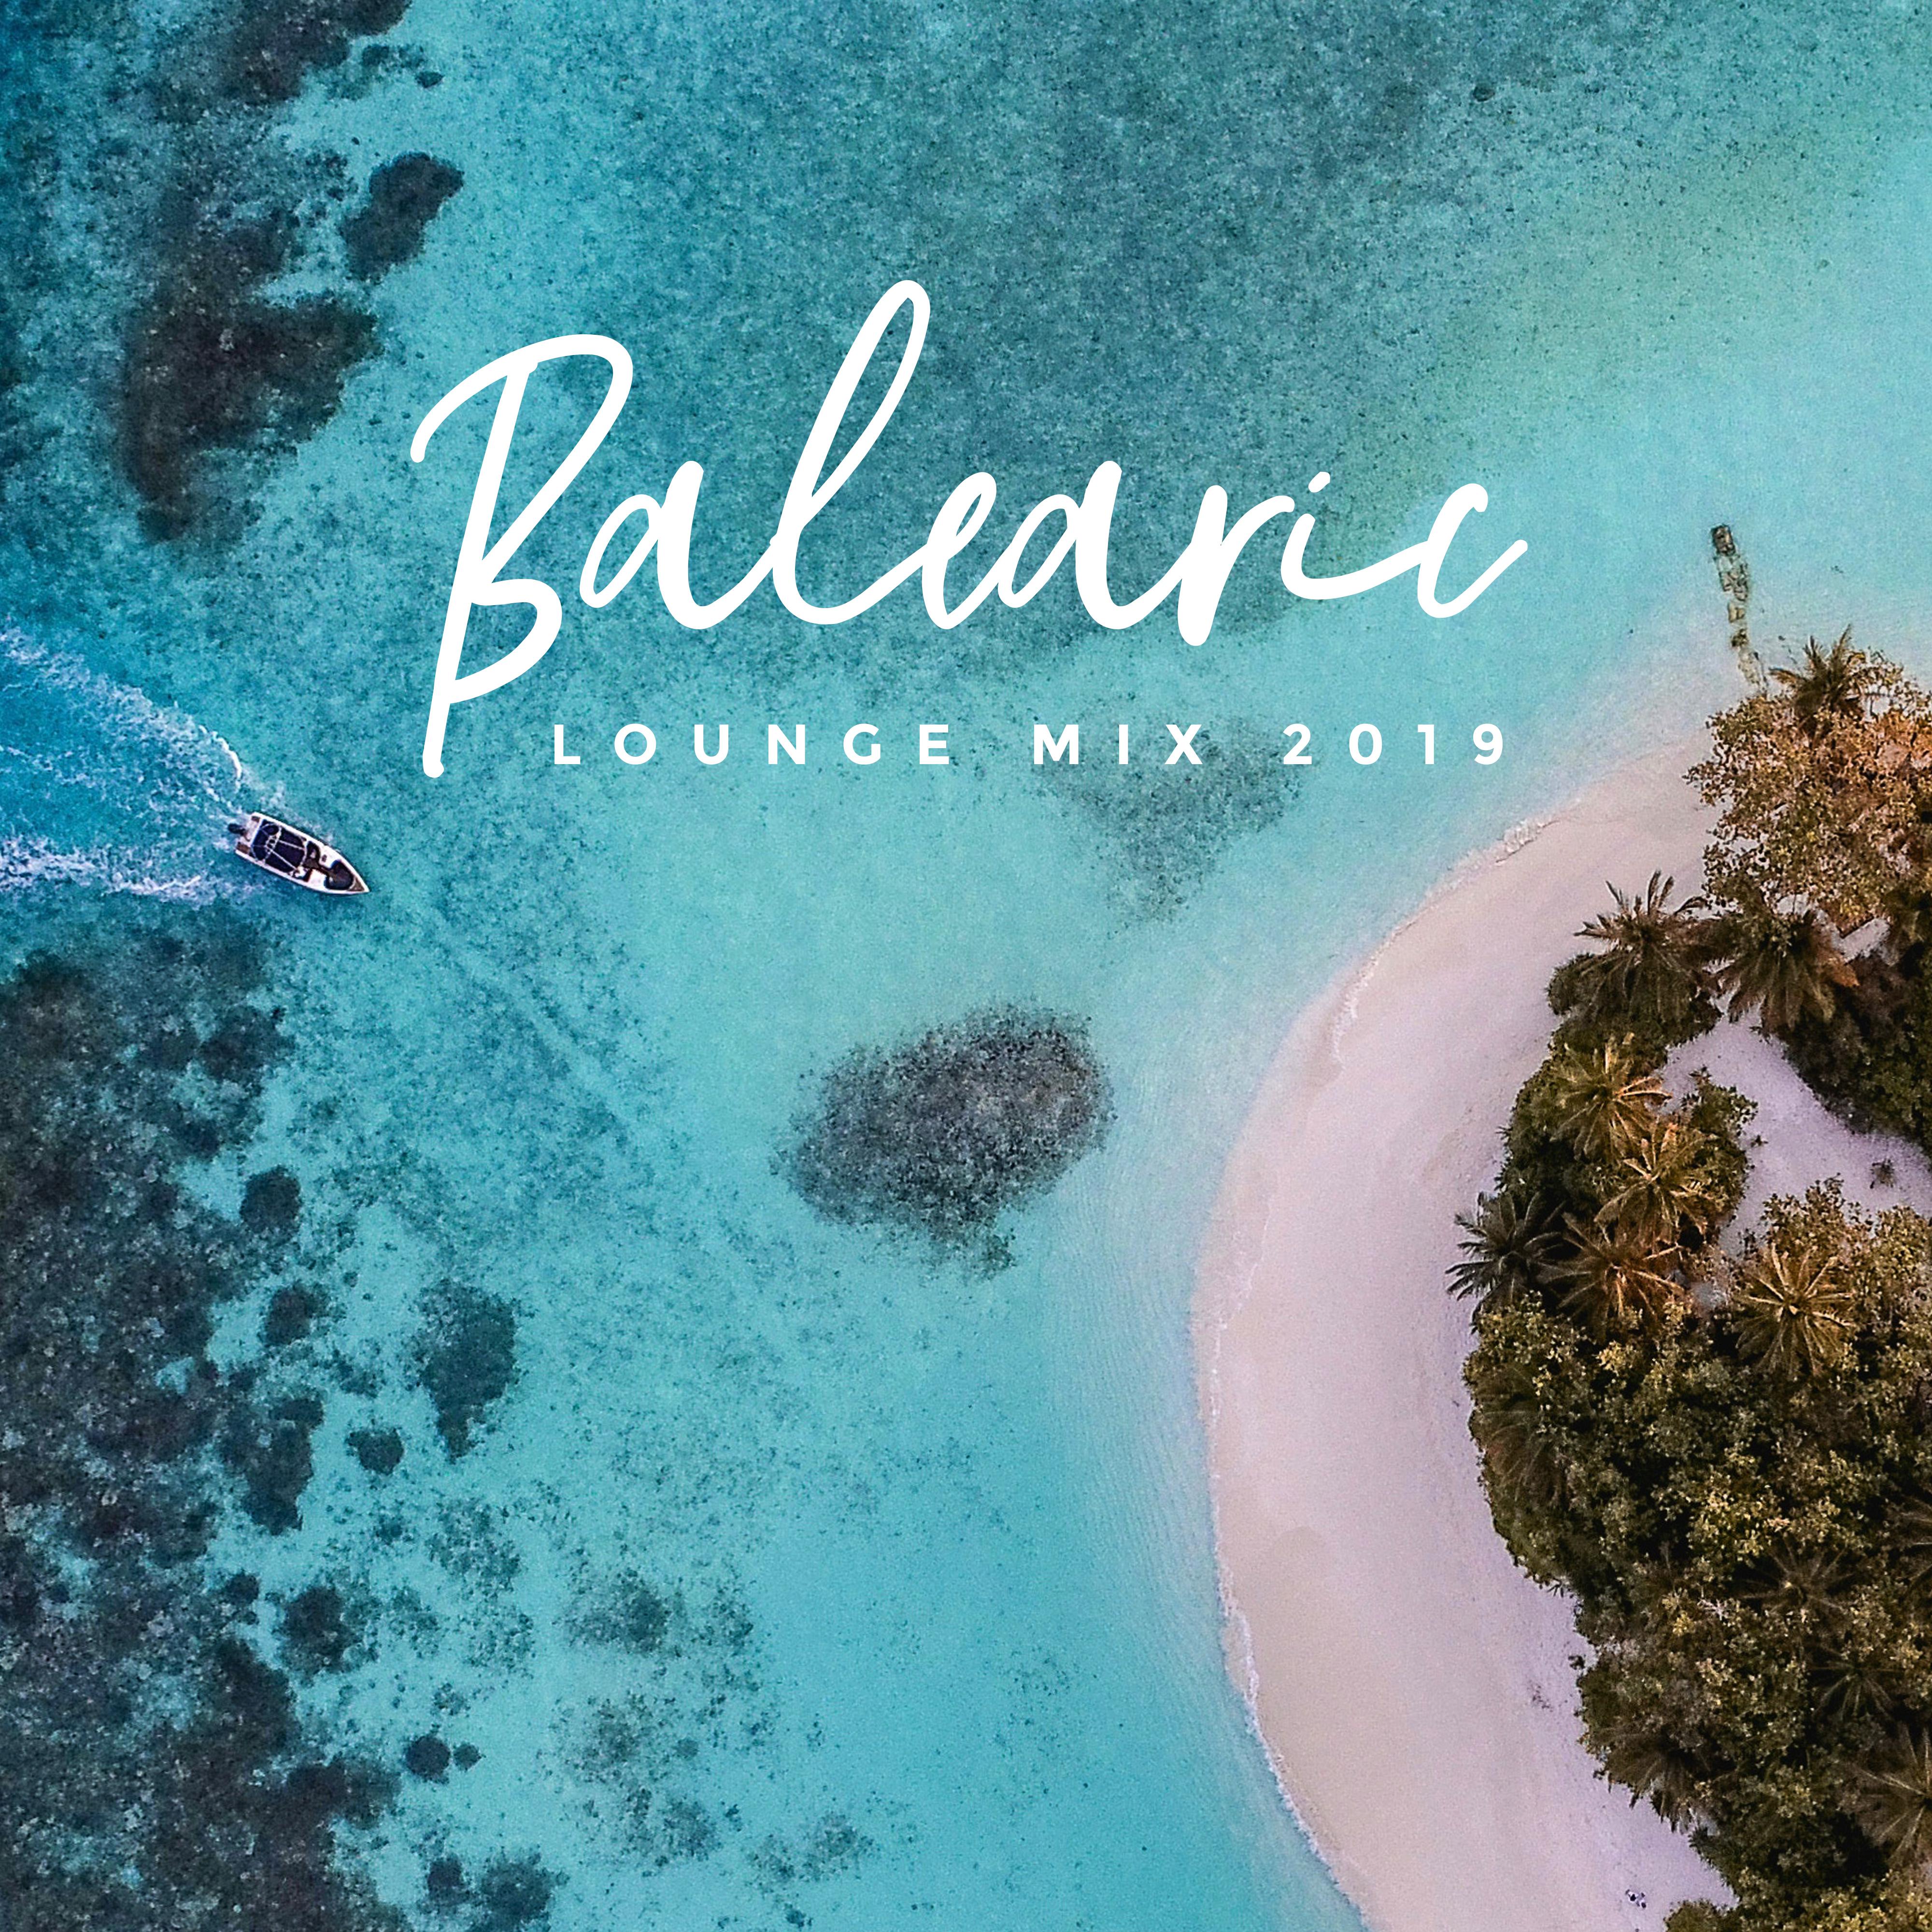 Balearic Lounge Mix 2019  Top Chillout Music Compilation, Energetic Vibes, Tropical Summer Beats, Beach Party